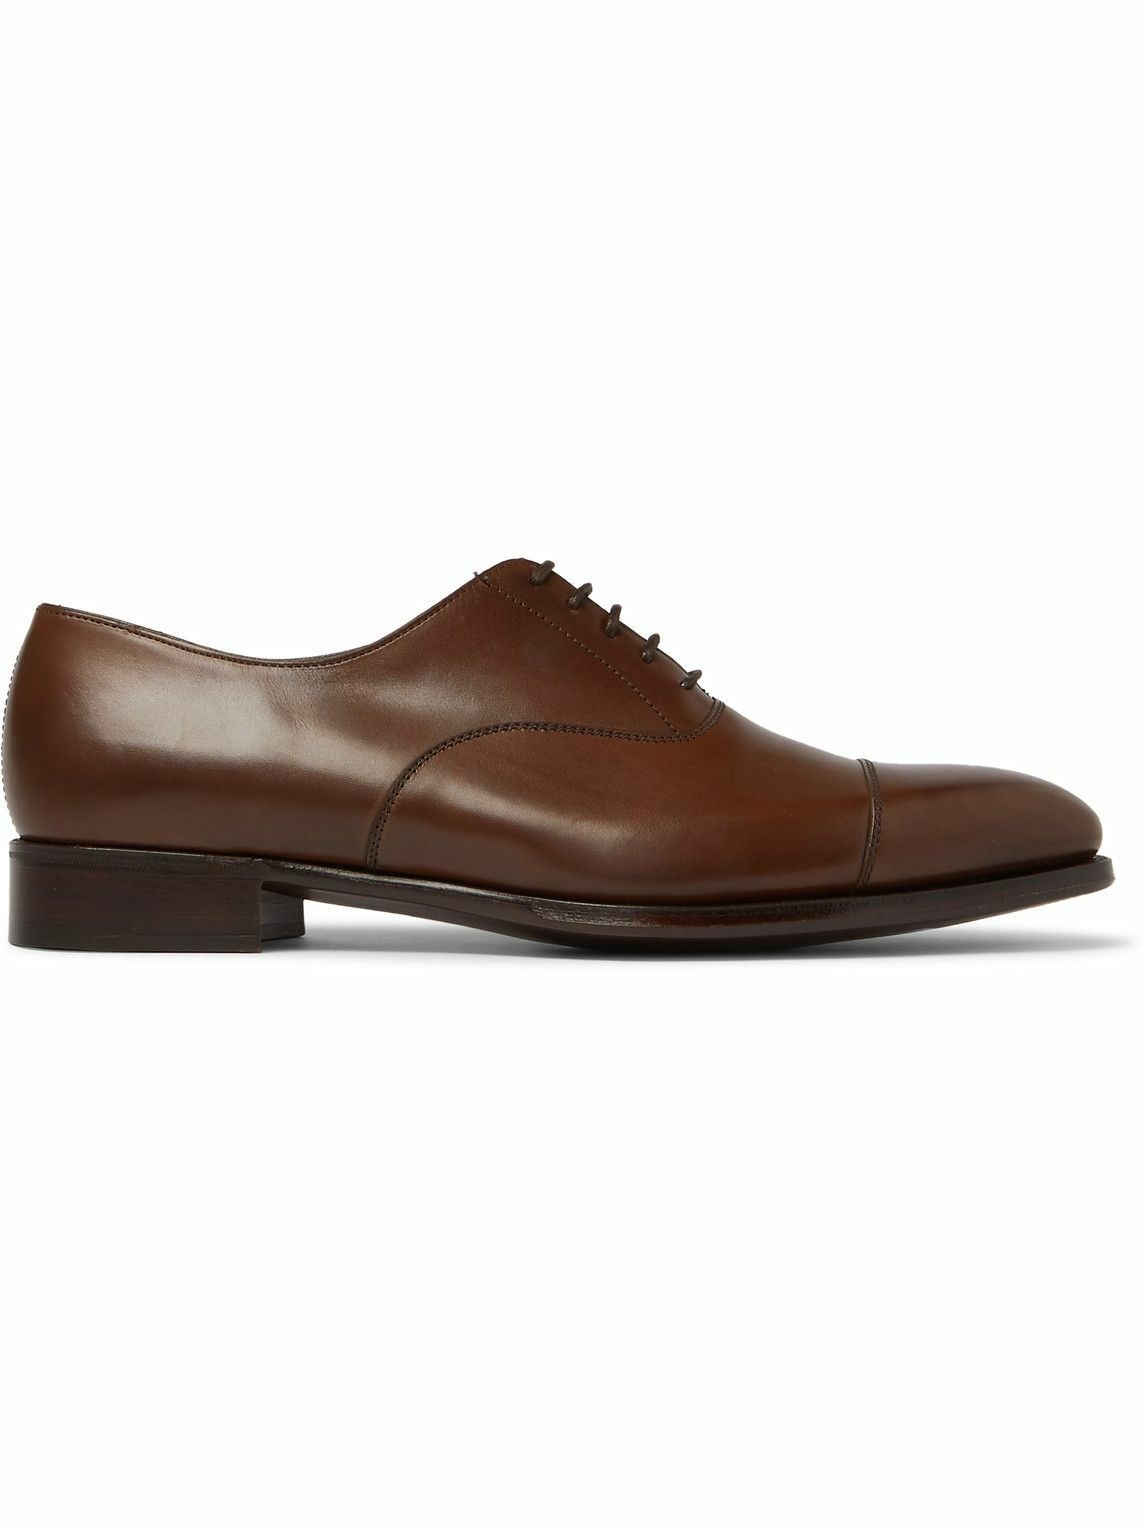 Photo: Kingsman - George Cleverley Harry Leather Oxford Shoes - Brown